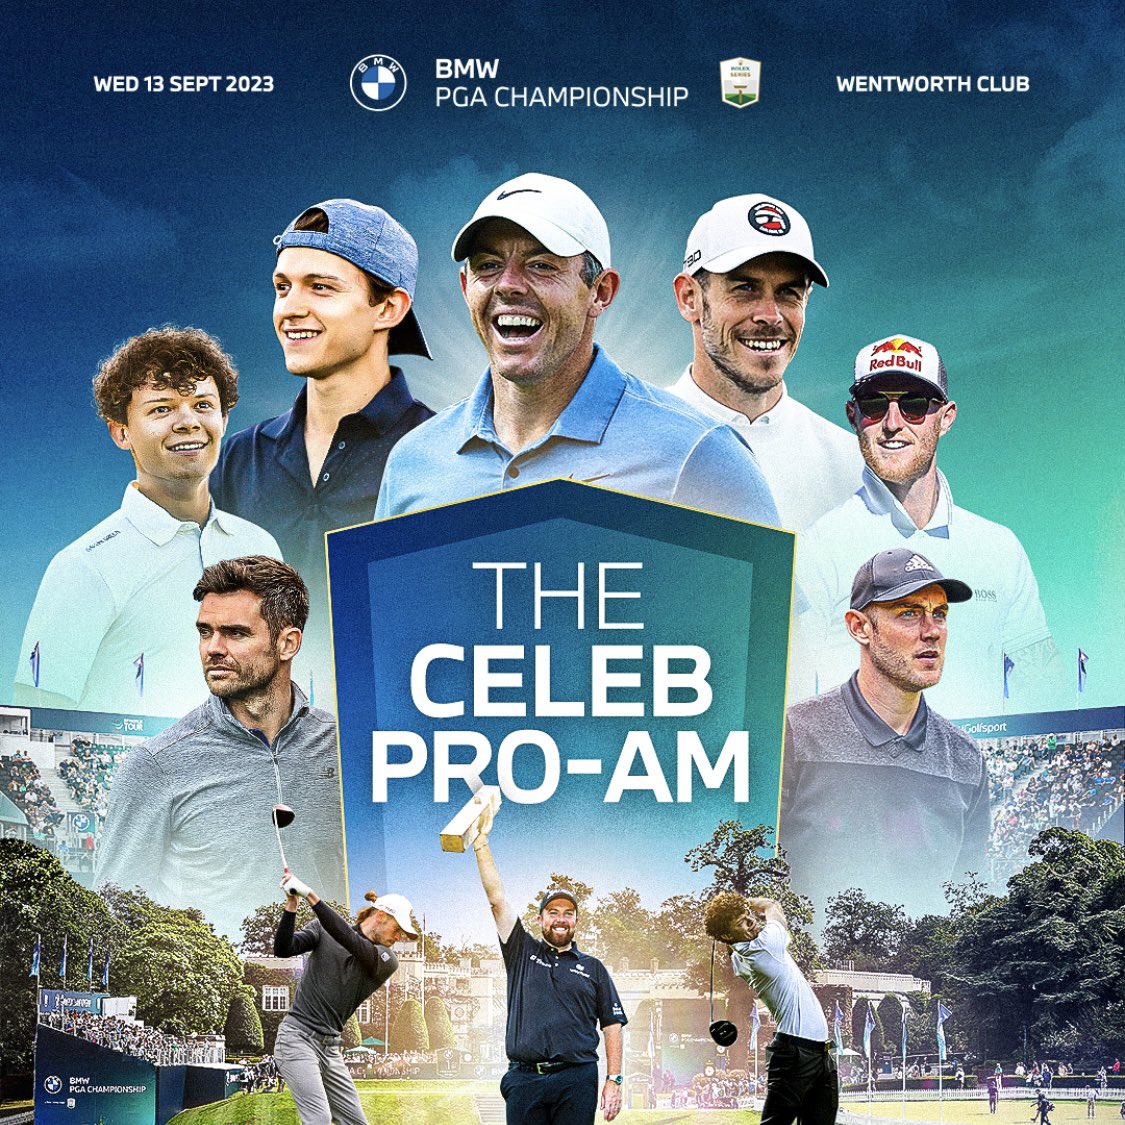 The 2023 #BMWPGA Pro-Am Field, with many many more names to come…🤩🤩🤩

✅ @GarethBale11 
✅ @benstokes38 
✅ @StuartBroad8 
✅ @jimmy9 
✅ @HarryHolland99 
✅ @TomHolland1996 

Who would you like to see next?

#RolexSeries